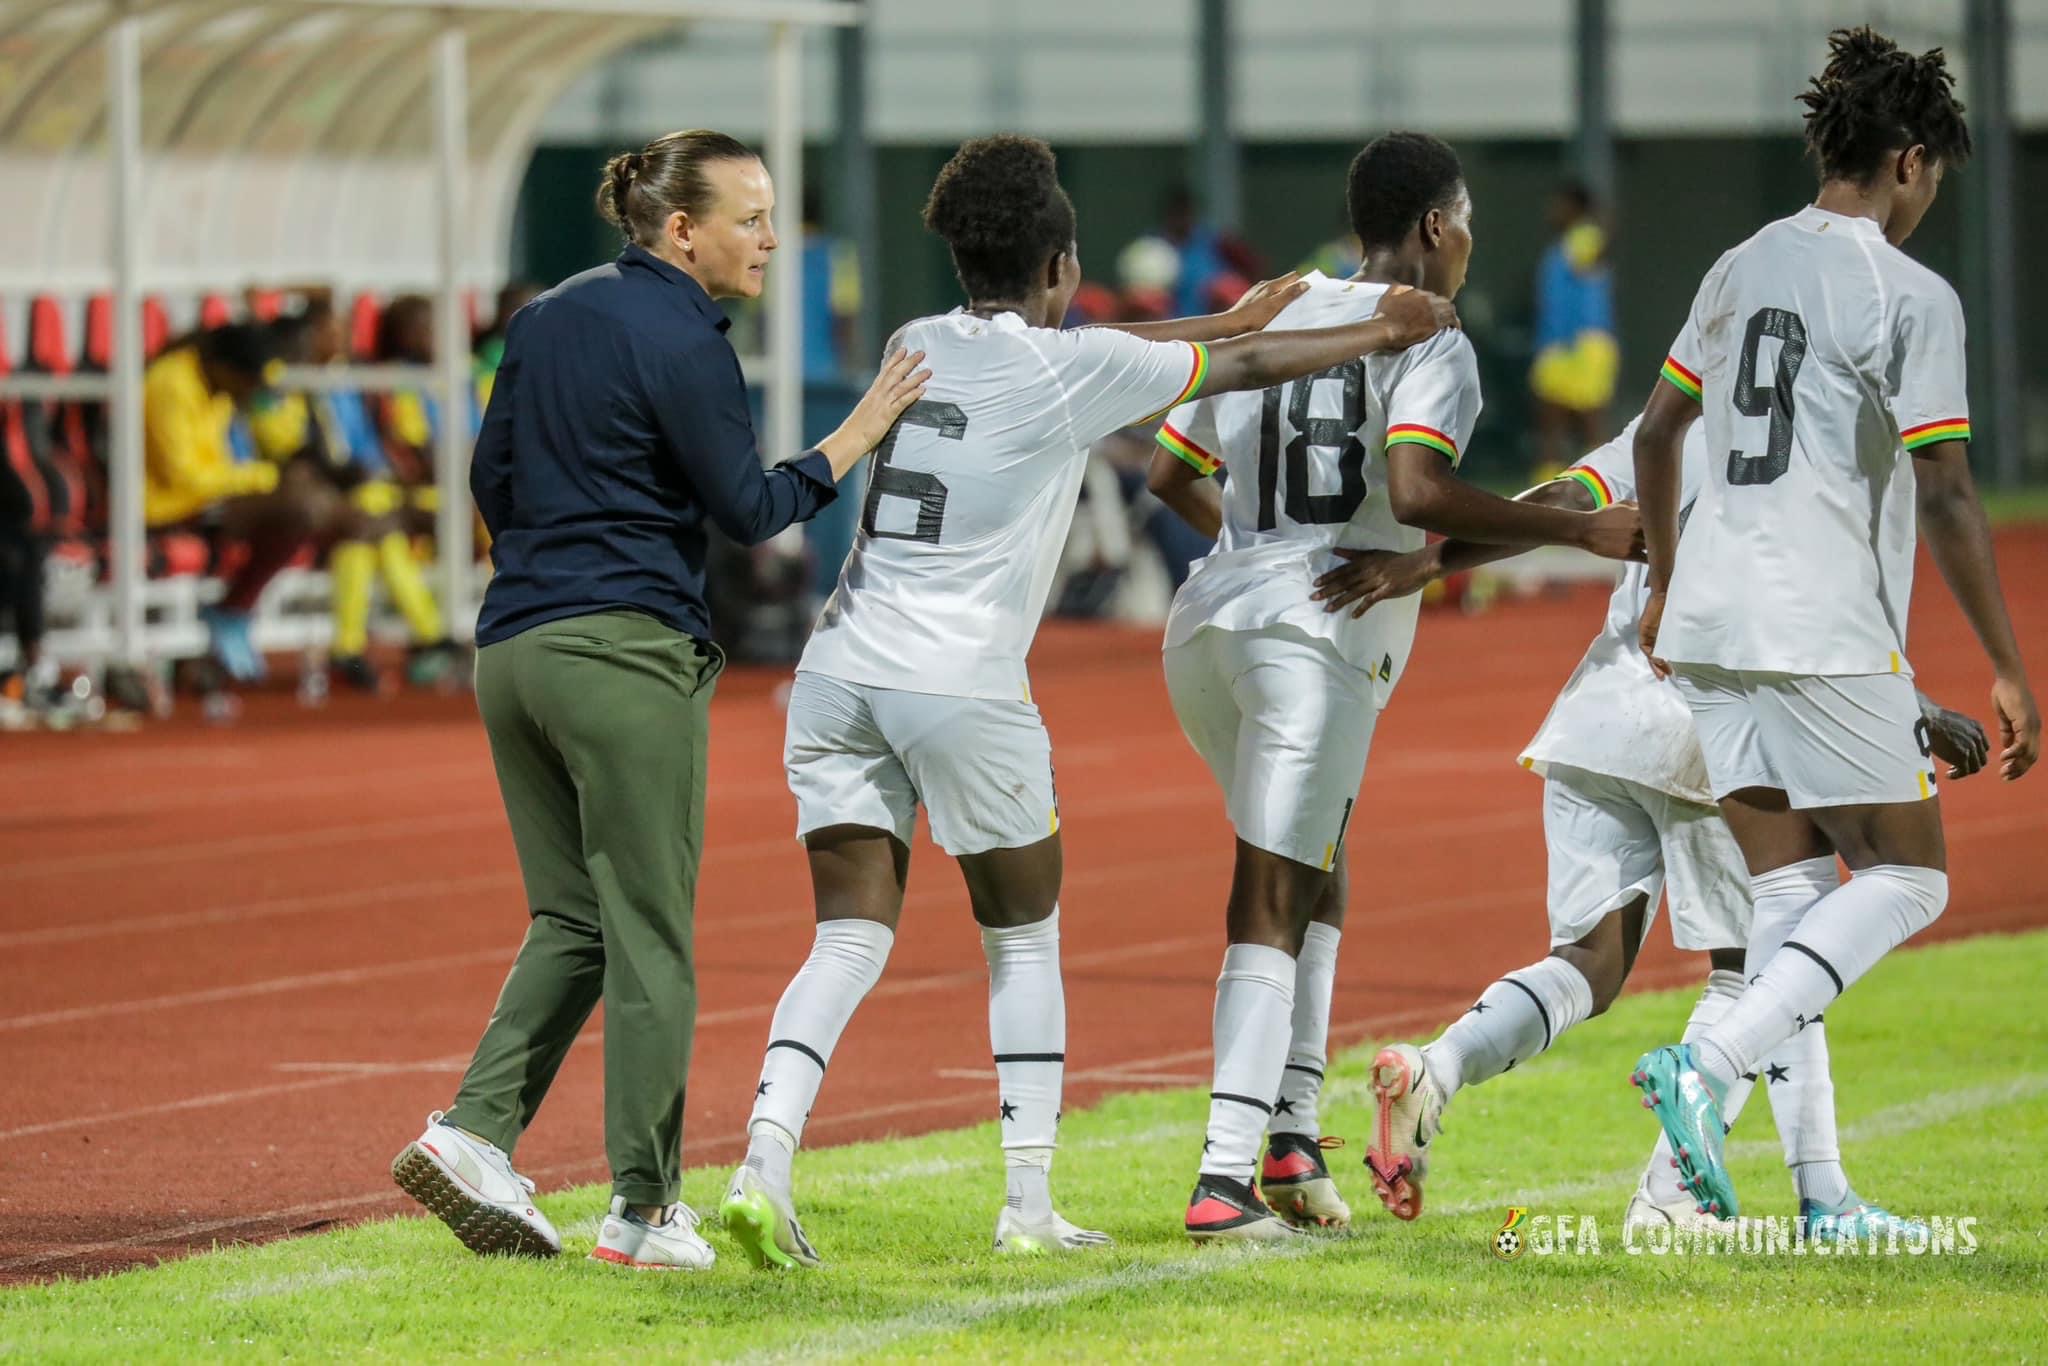 2024 Olympic qualifiers: Benin win very intense because they’re strong opponents – Nora Hauptle